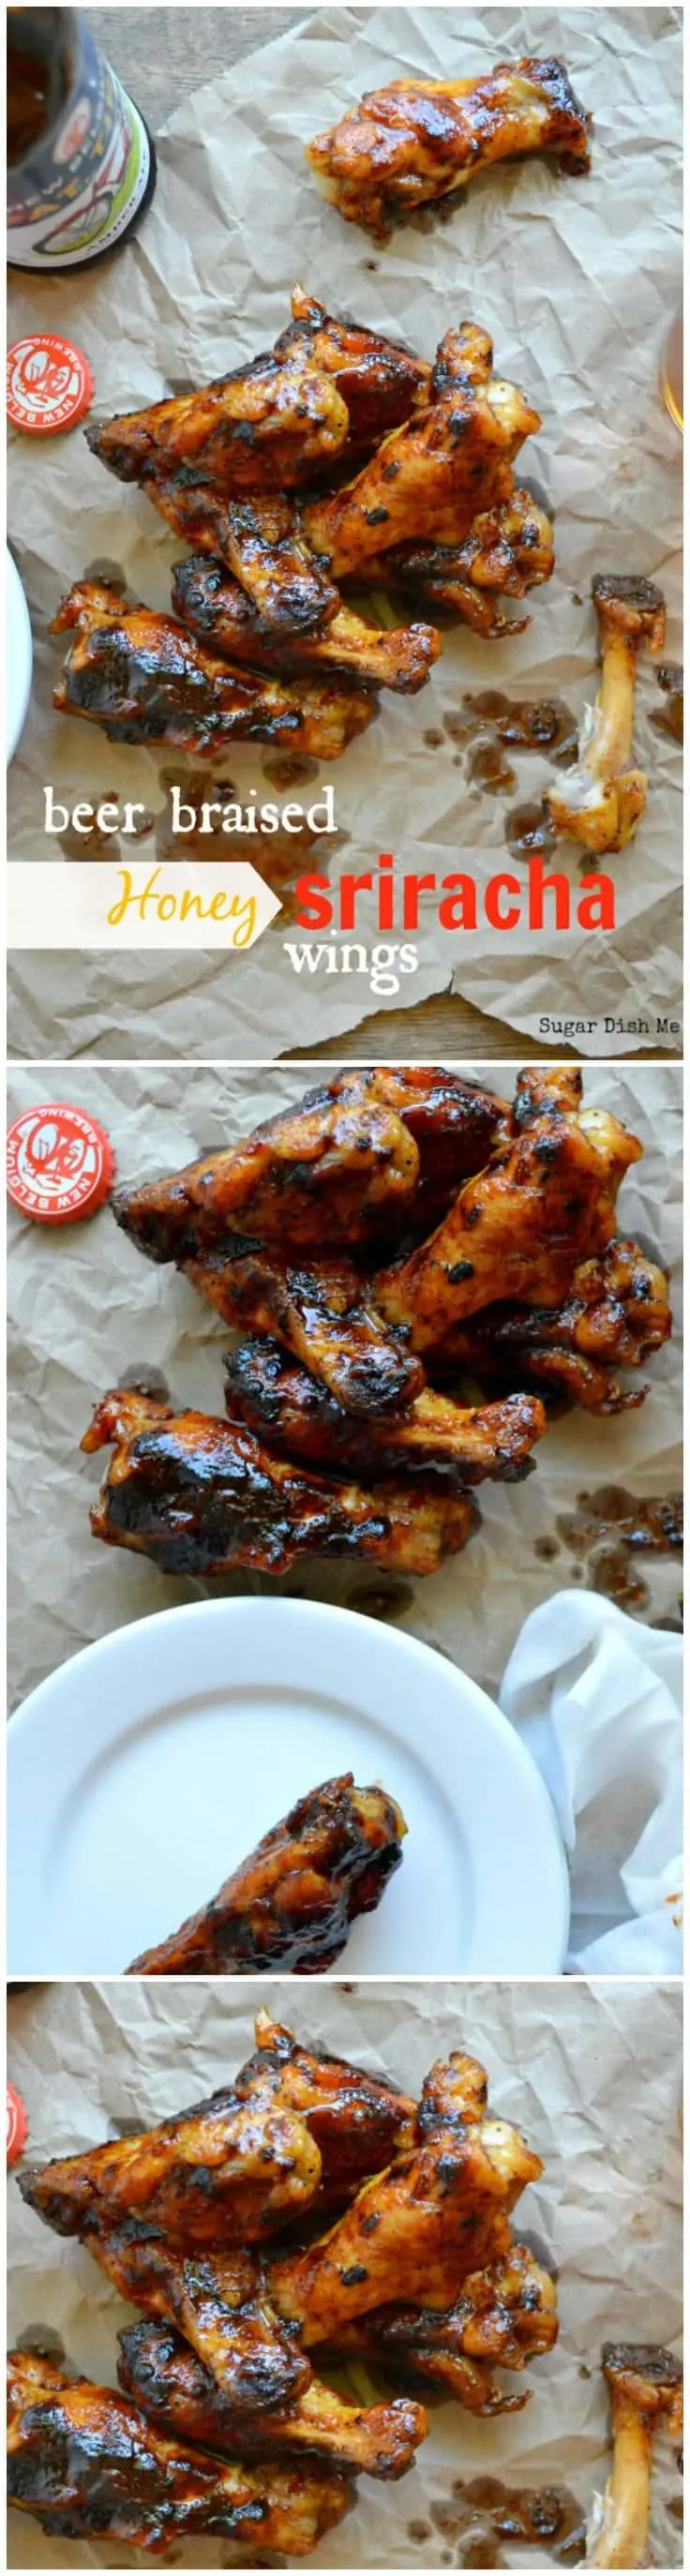 Turn out perfect crispy wings without frying! These Beer Braised Honey Sriracha Wings are sweet, spicy, and the perfect appetizer for game day gatherings!